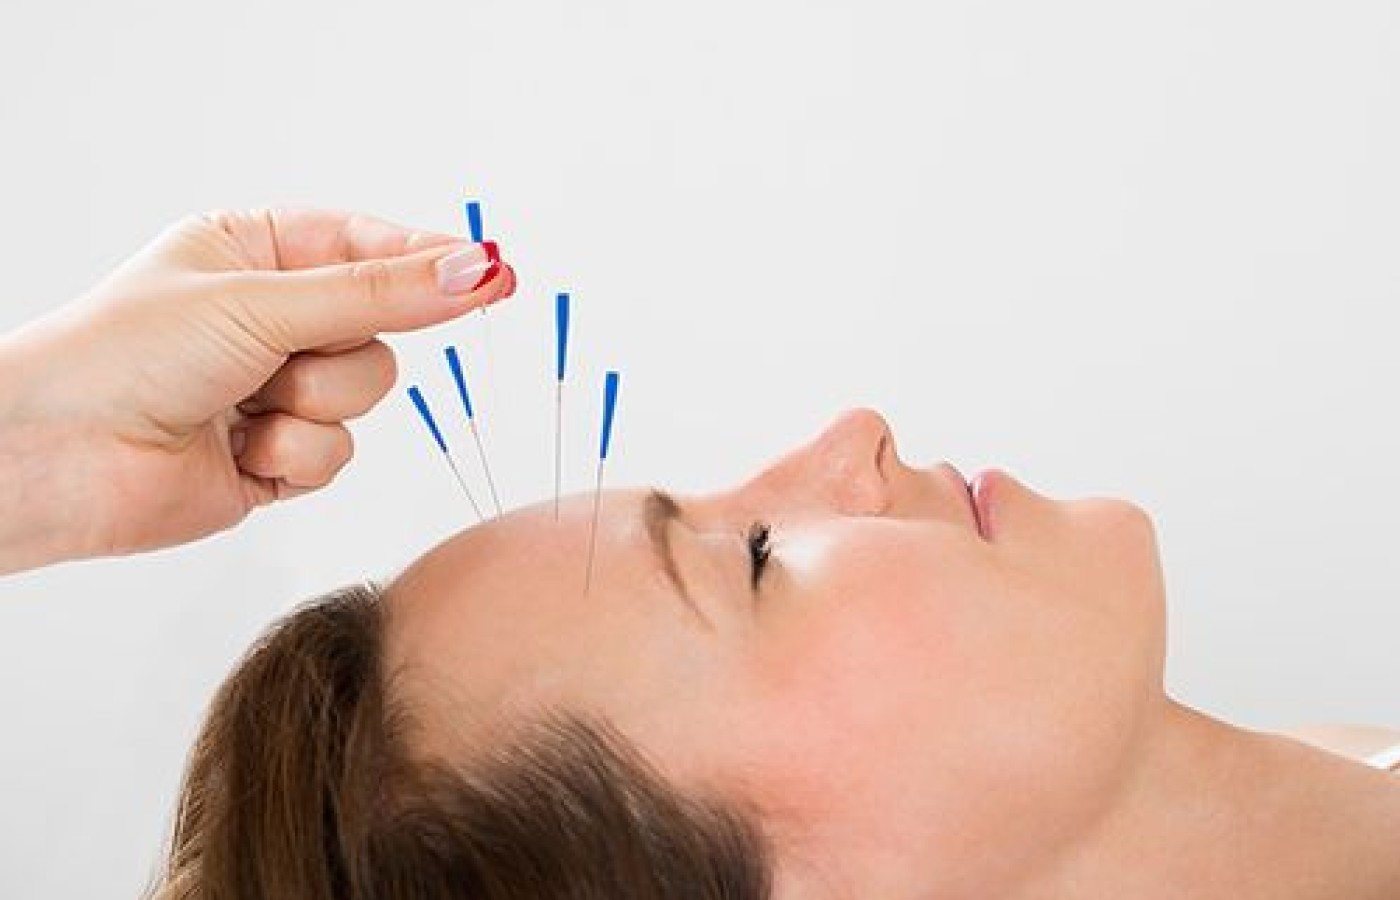 The FDA Recommends Acupuncture: Comments From Key AOM Stakeholders